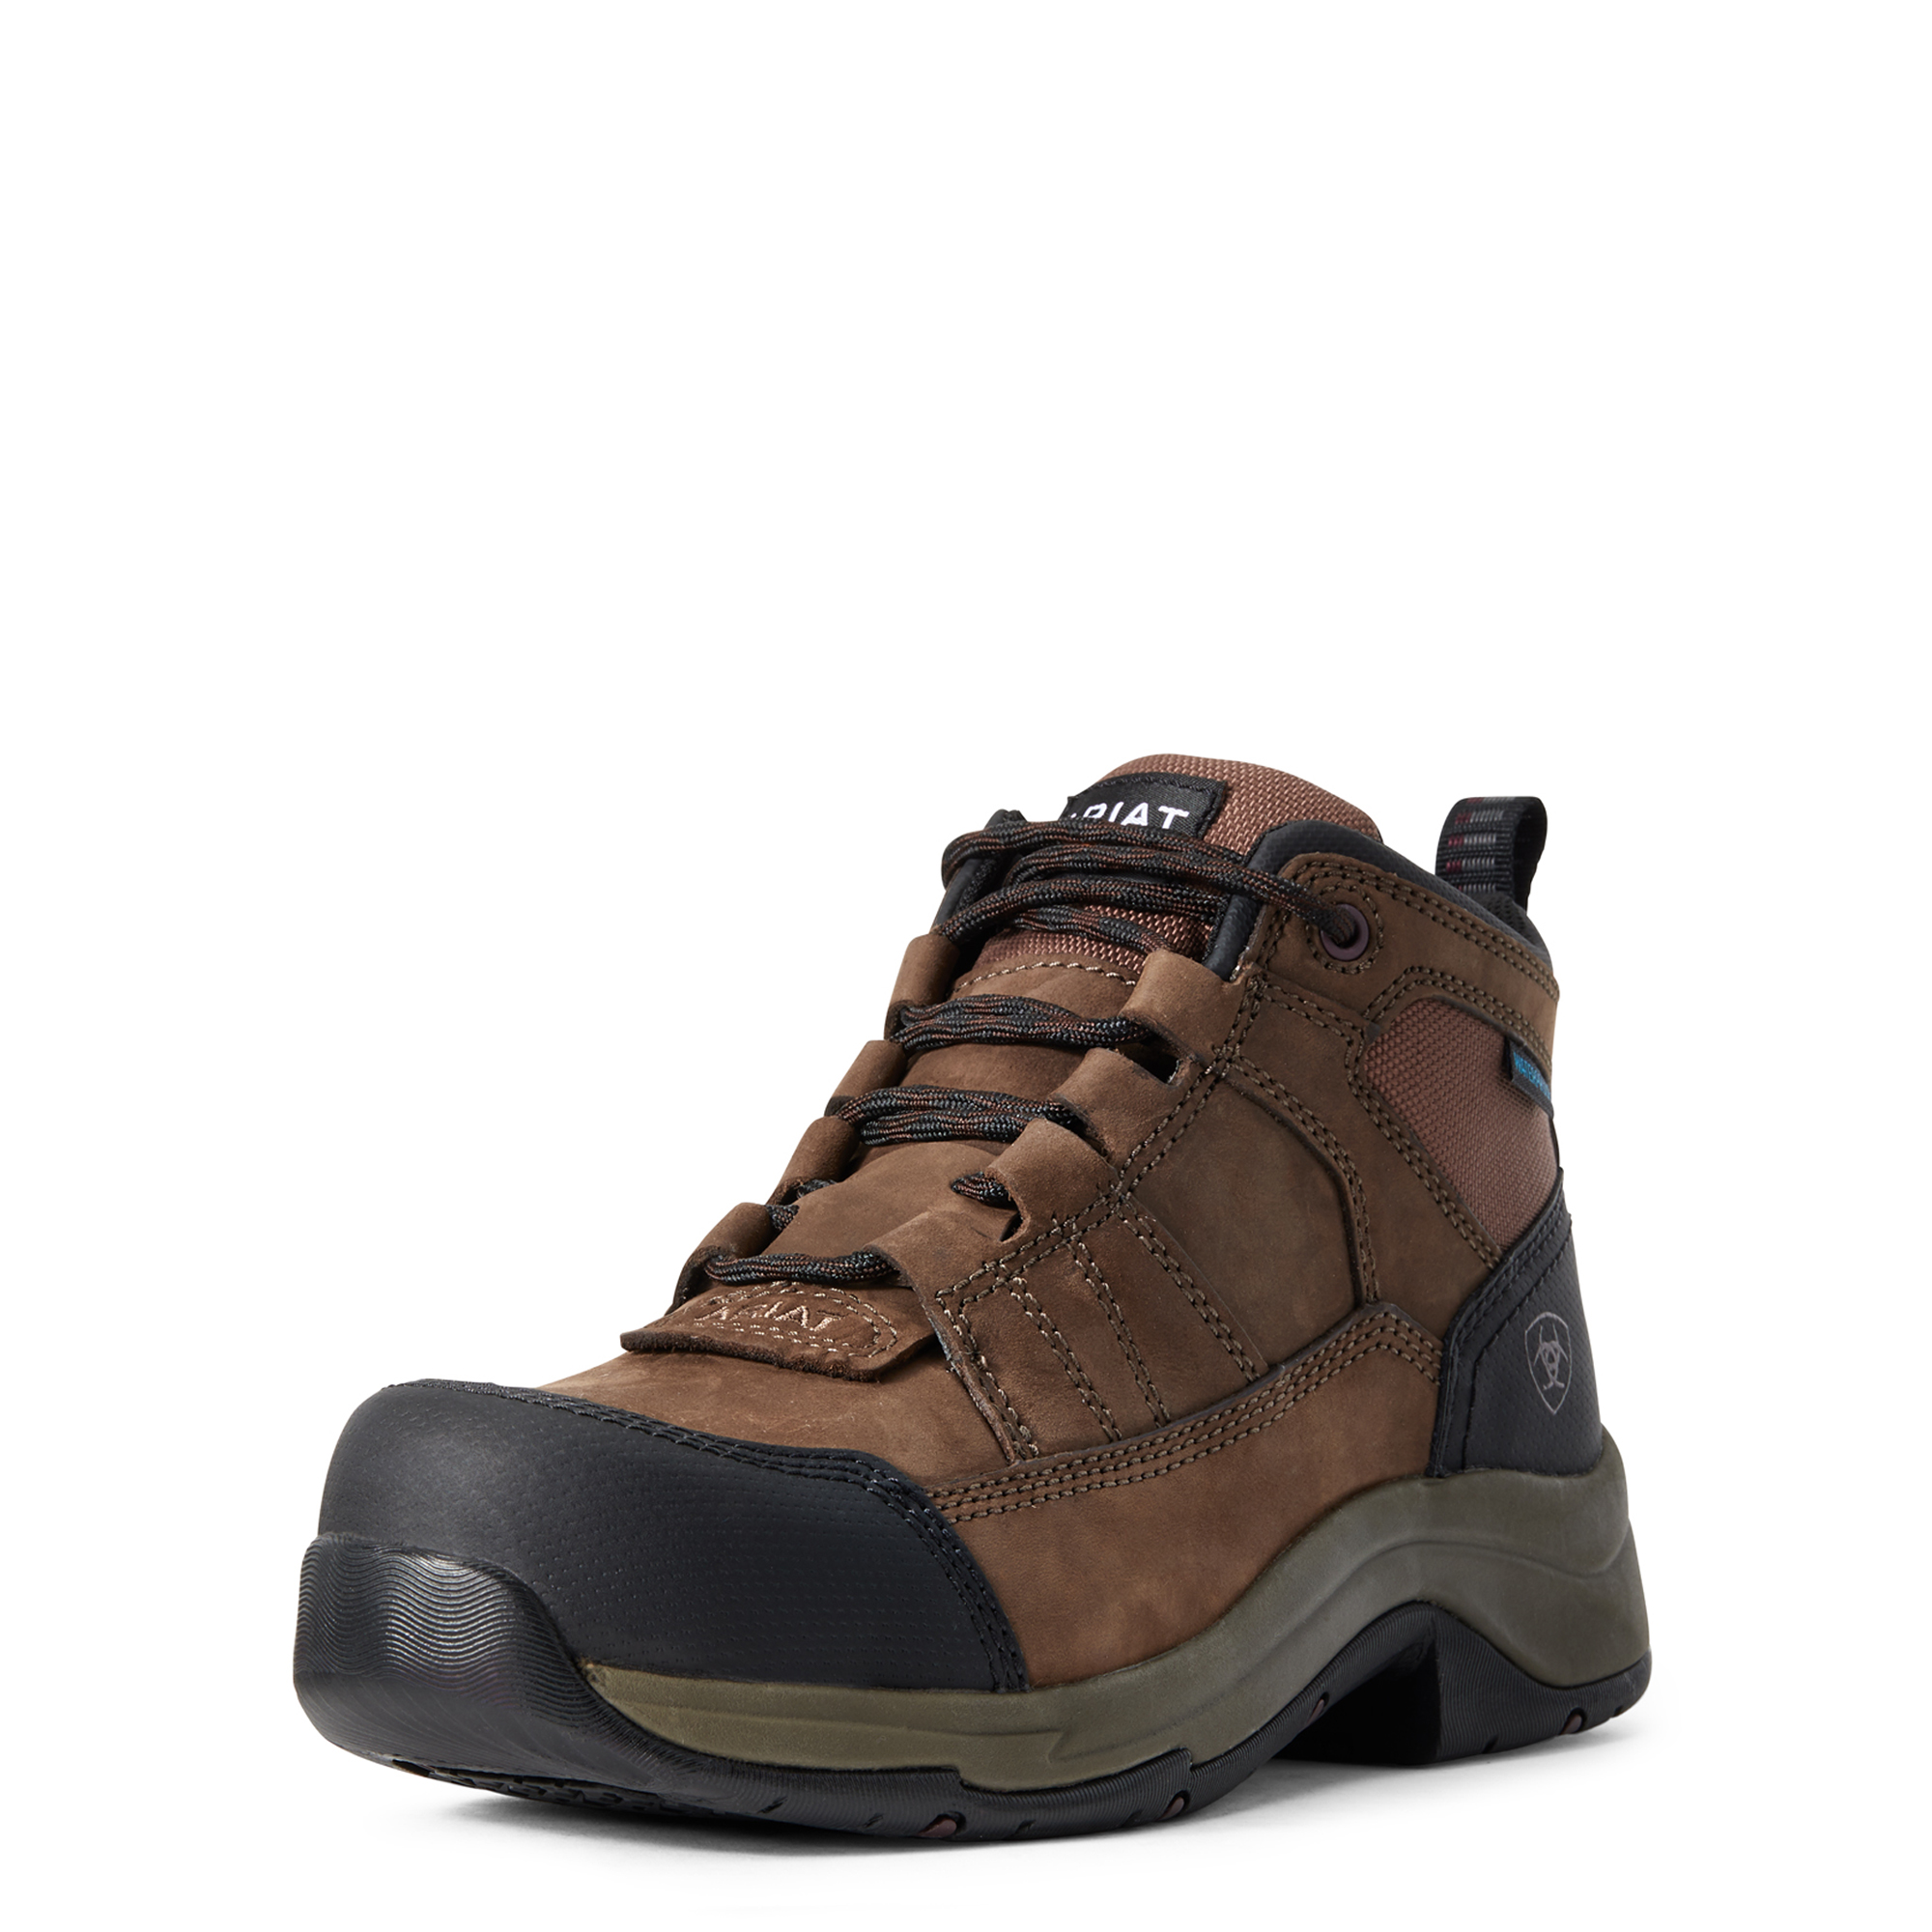 Ariat Women's Telluride Waterproof Work Boots with Composite Toe from GME Supply